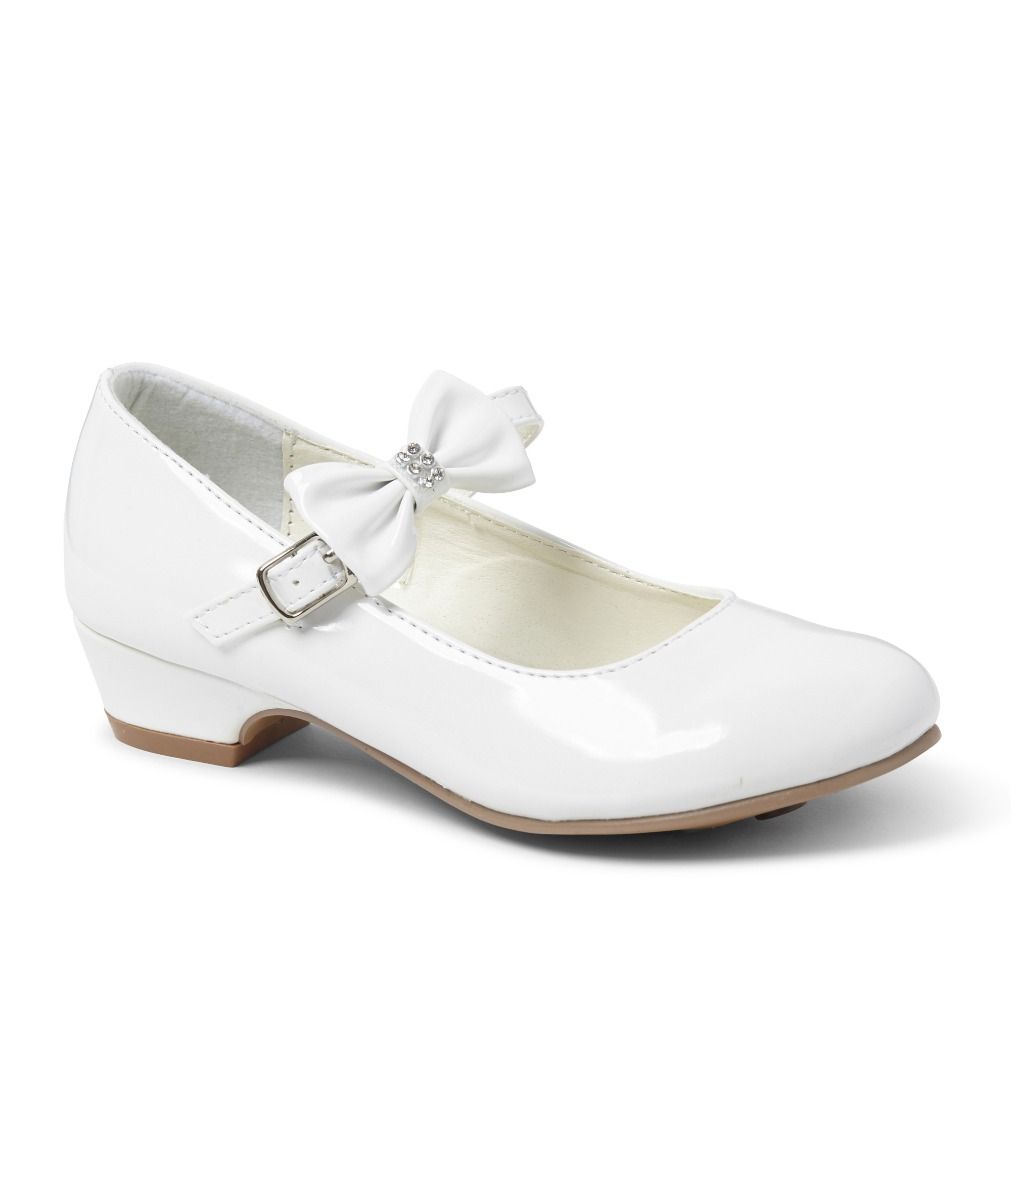 MKBride_girls-shoes_Daisy_White